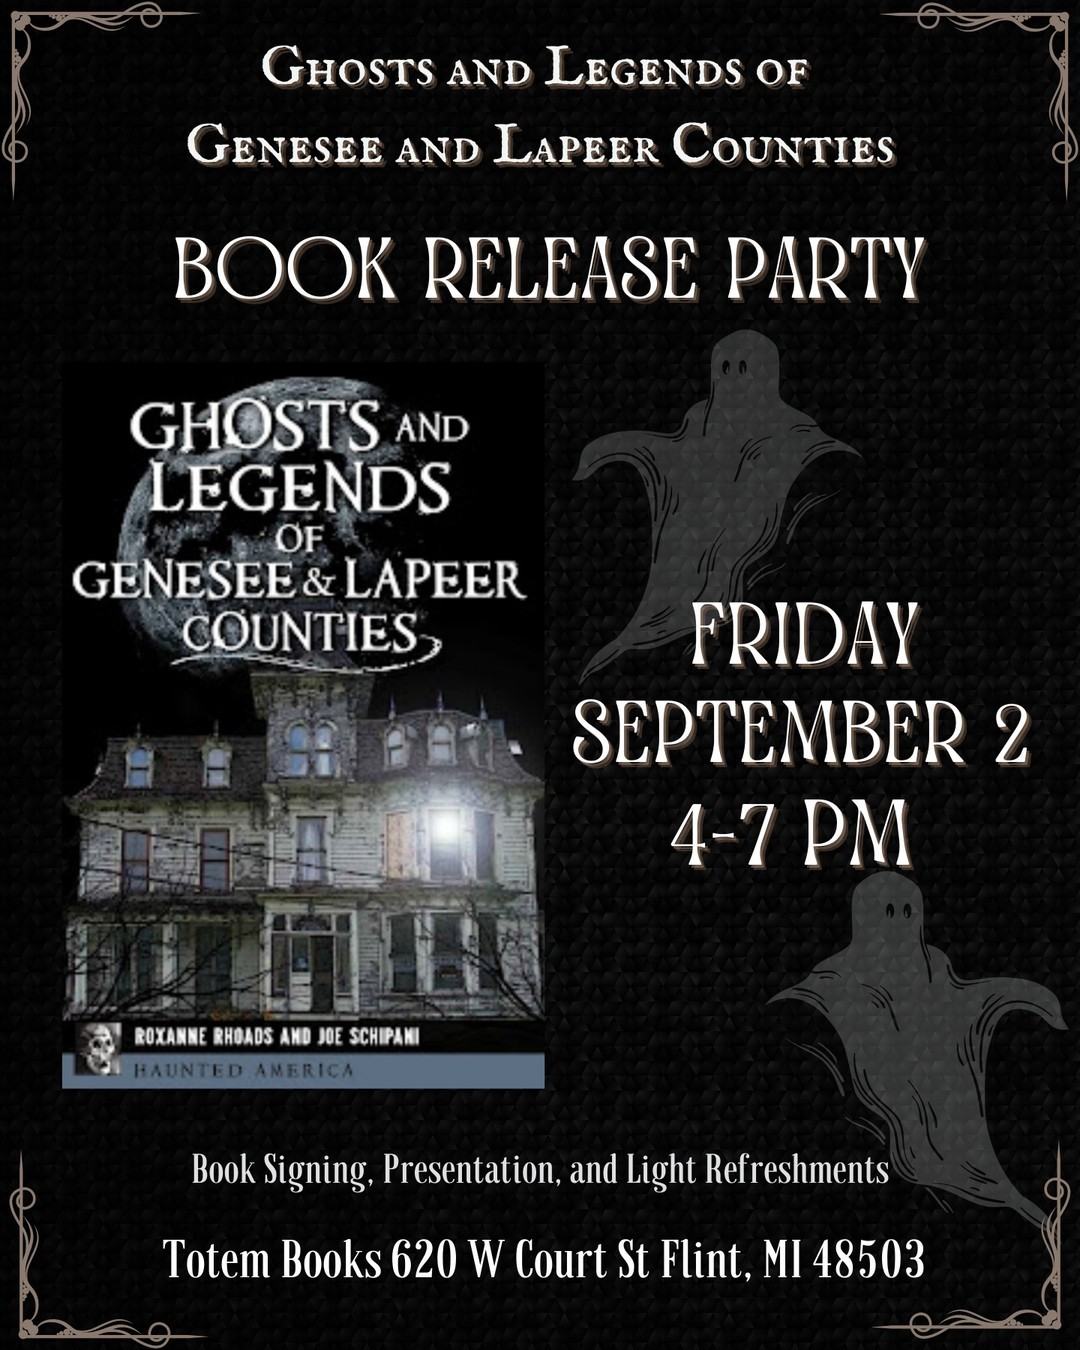 FRIDAY, SEPTEMBER 2, 2022 AT 4 PM – 7 PM
Totem Books 620 W Court St, Flint, MI 48503
Book Release Party for Ghosts and Legends of Genesee and Lapeer Counties
https://ift.tt/mi5ker6 — view on Instagram https://ift.tt/4RroKCs